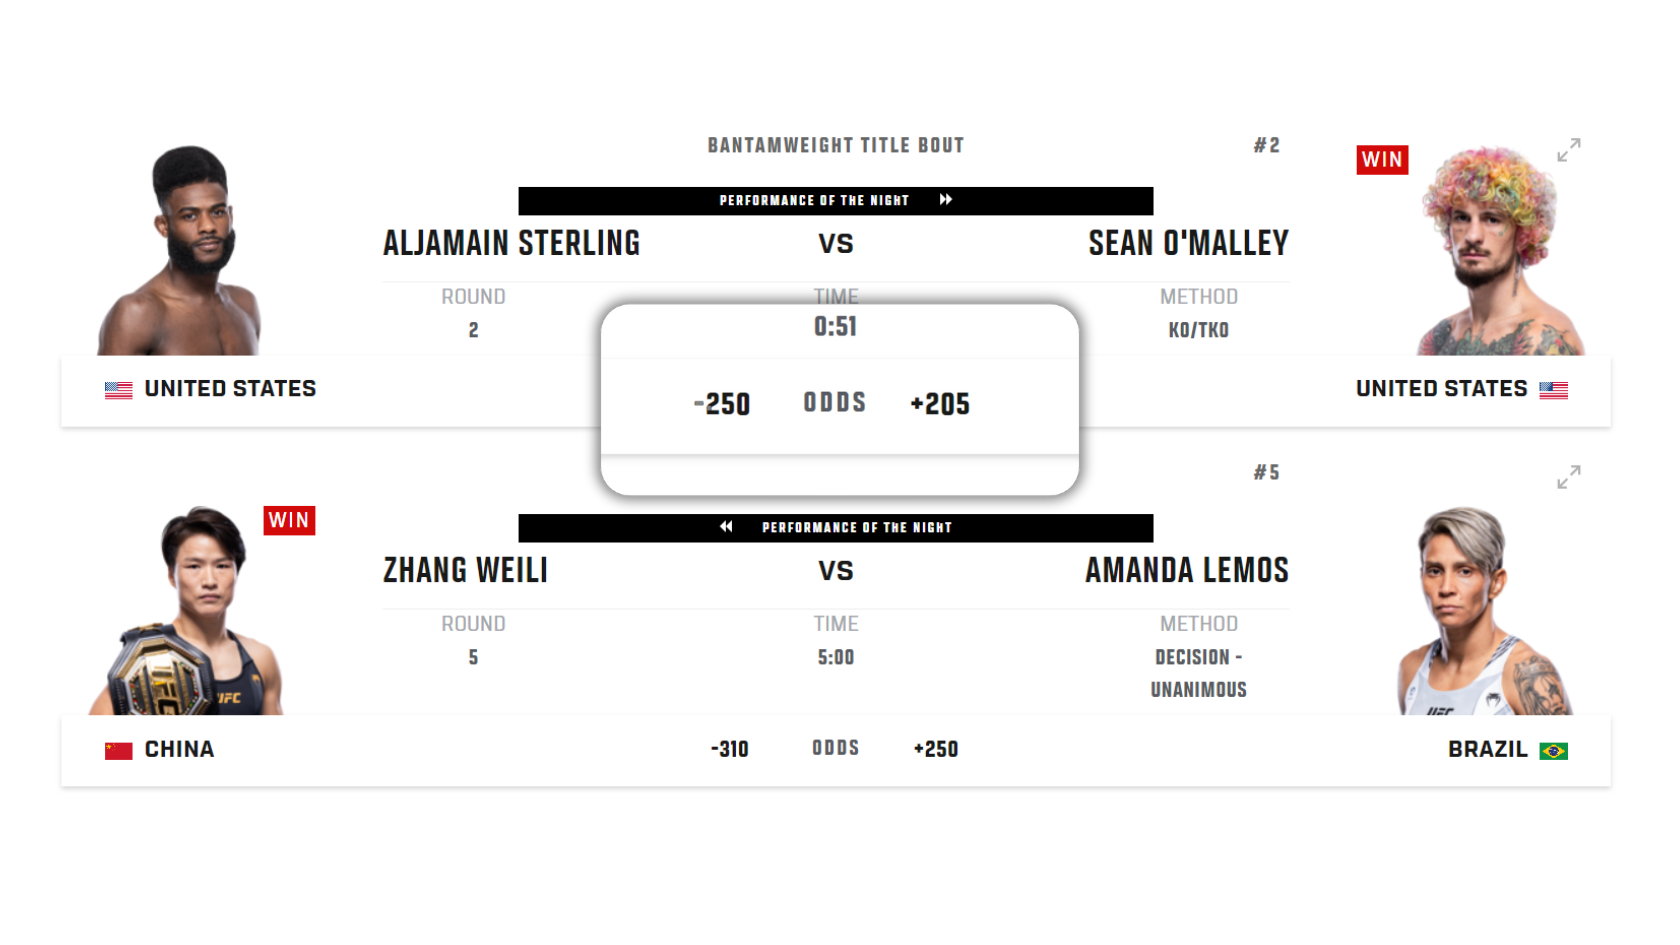 An example of a moneyline listed at the ufc.